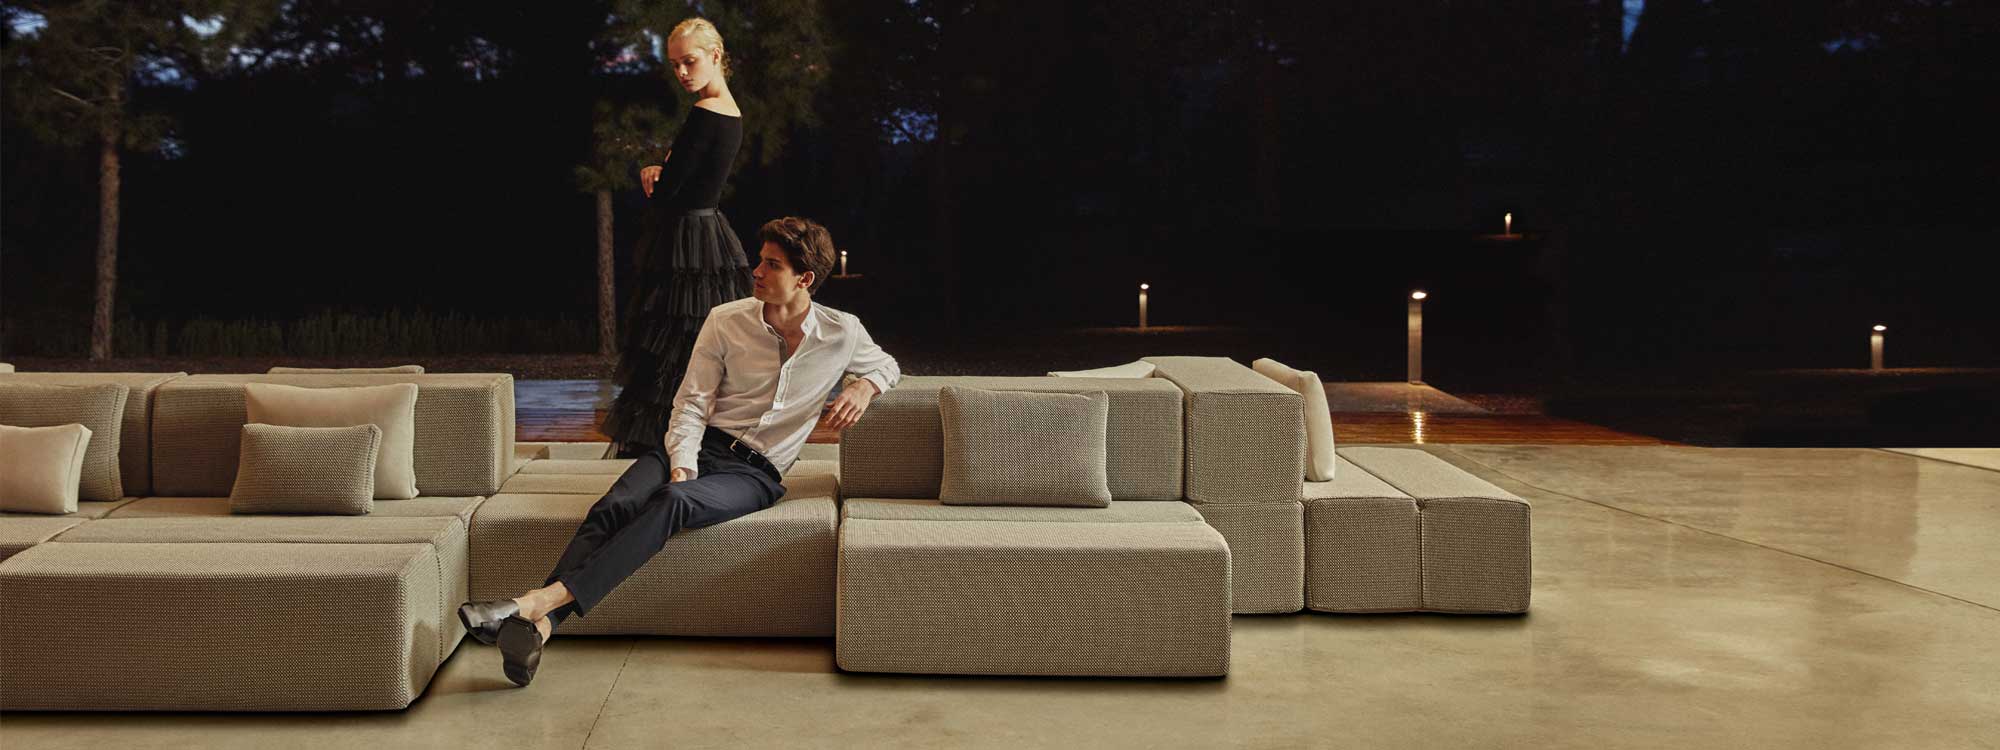 Image of couple sat on and around Vondom Tablet modular garden lounge furniture, with illuminated garden in the background